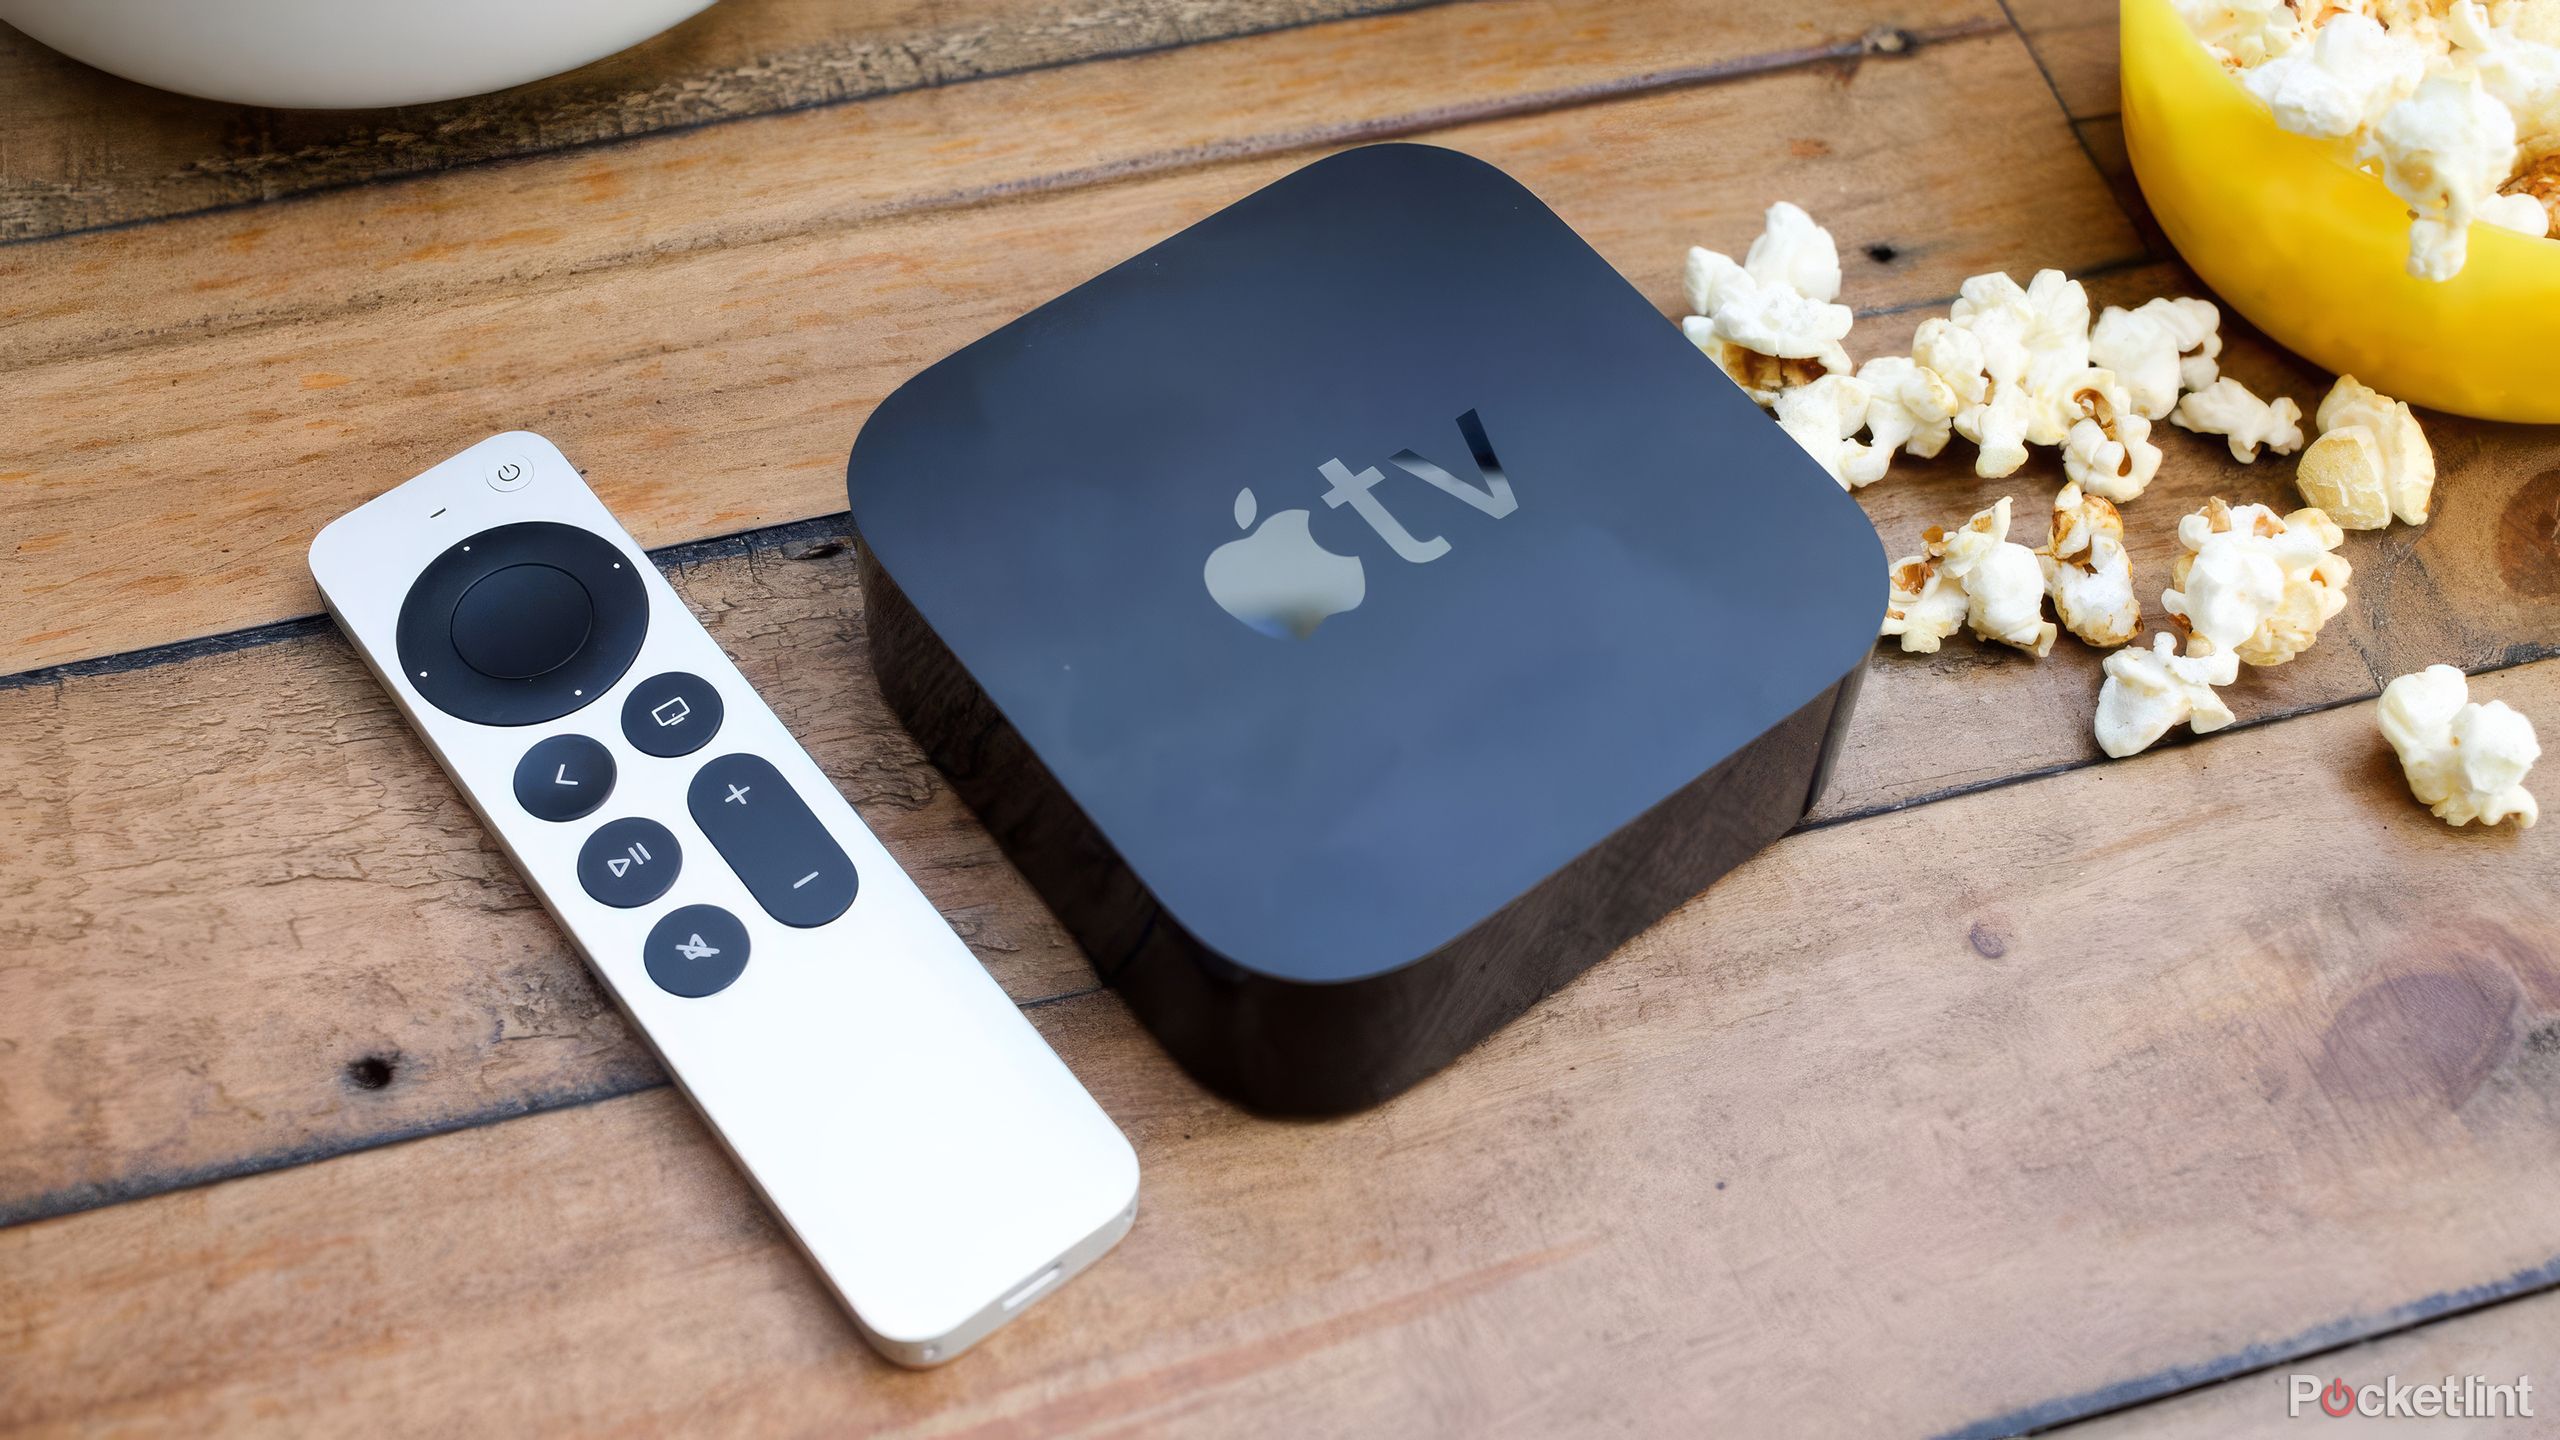 Free Apple TV channels you’ll actually watch